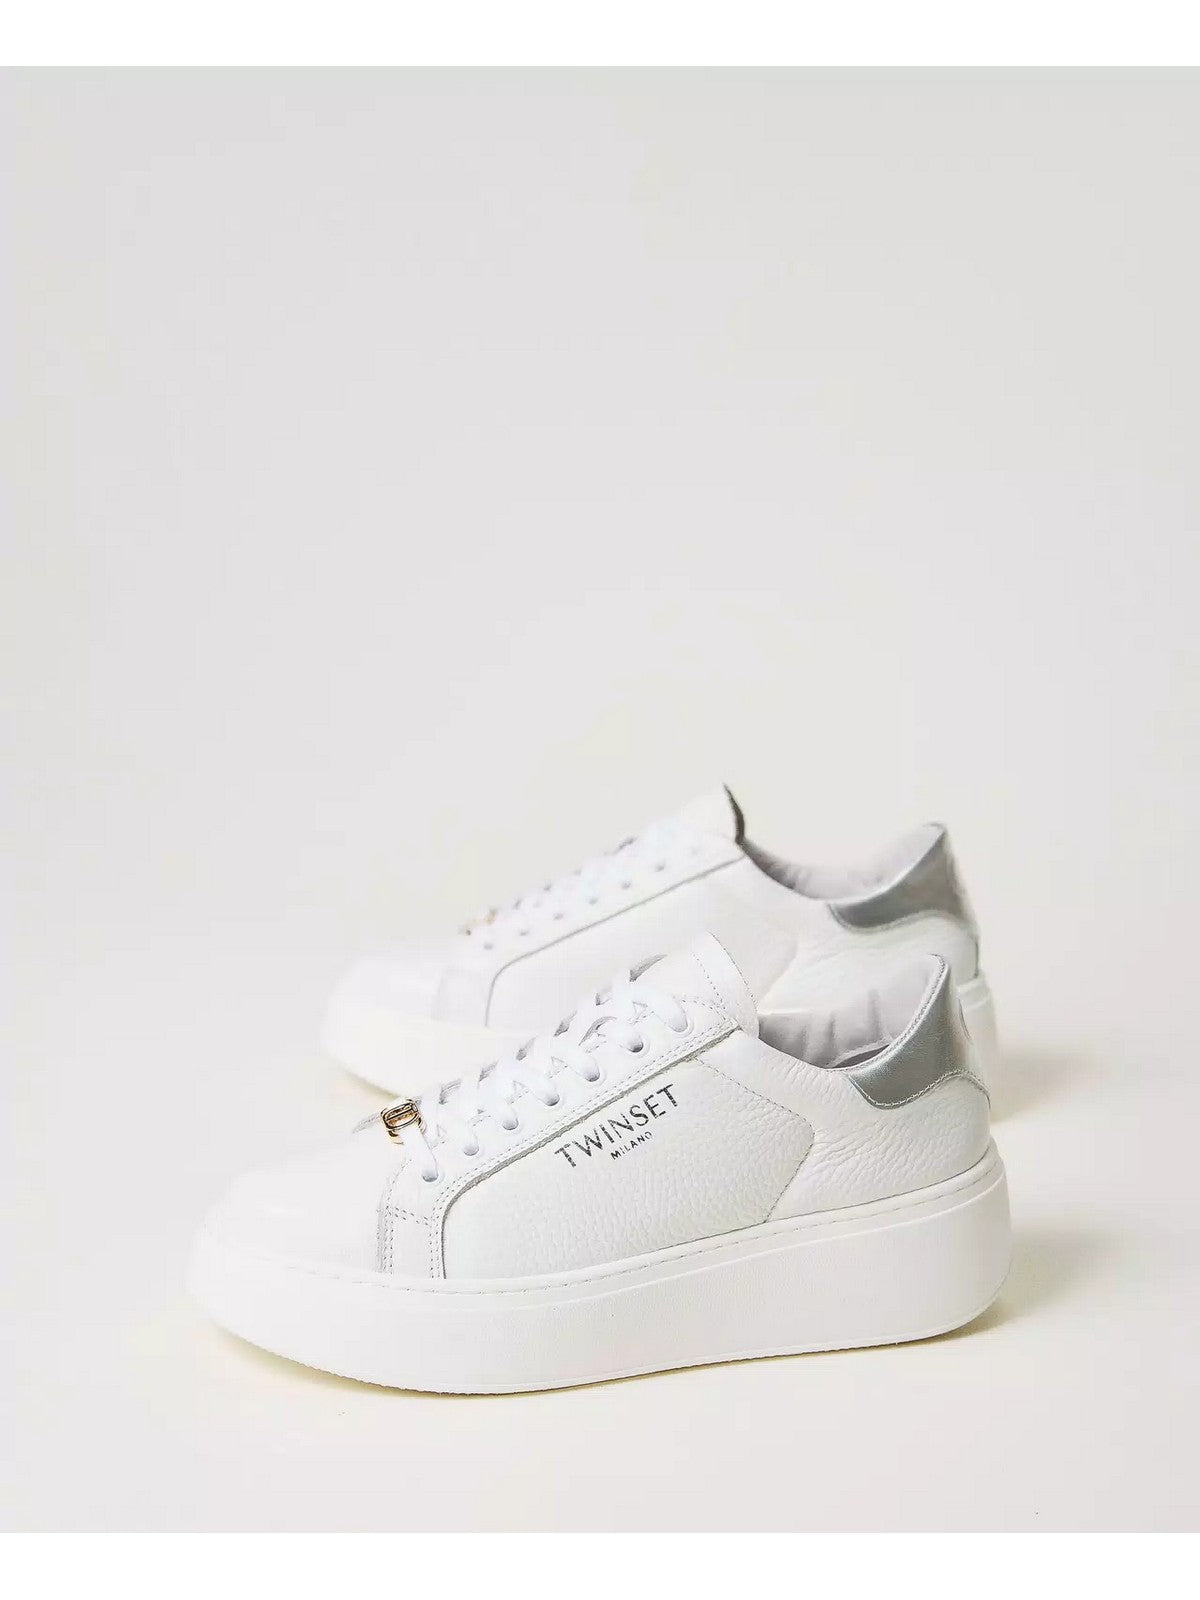 TWINSET Sneaker Donna  241TCP050 07200 Bianco